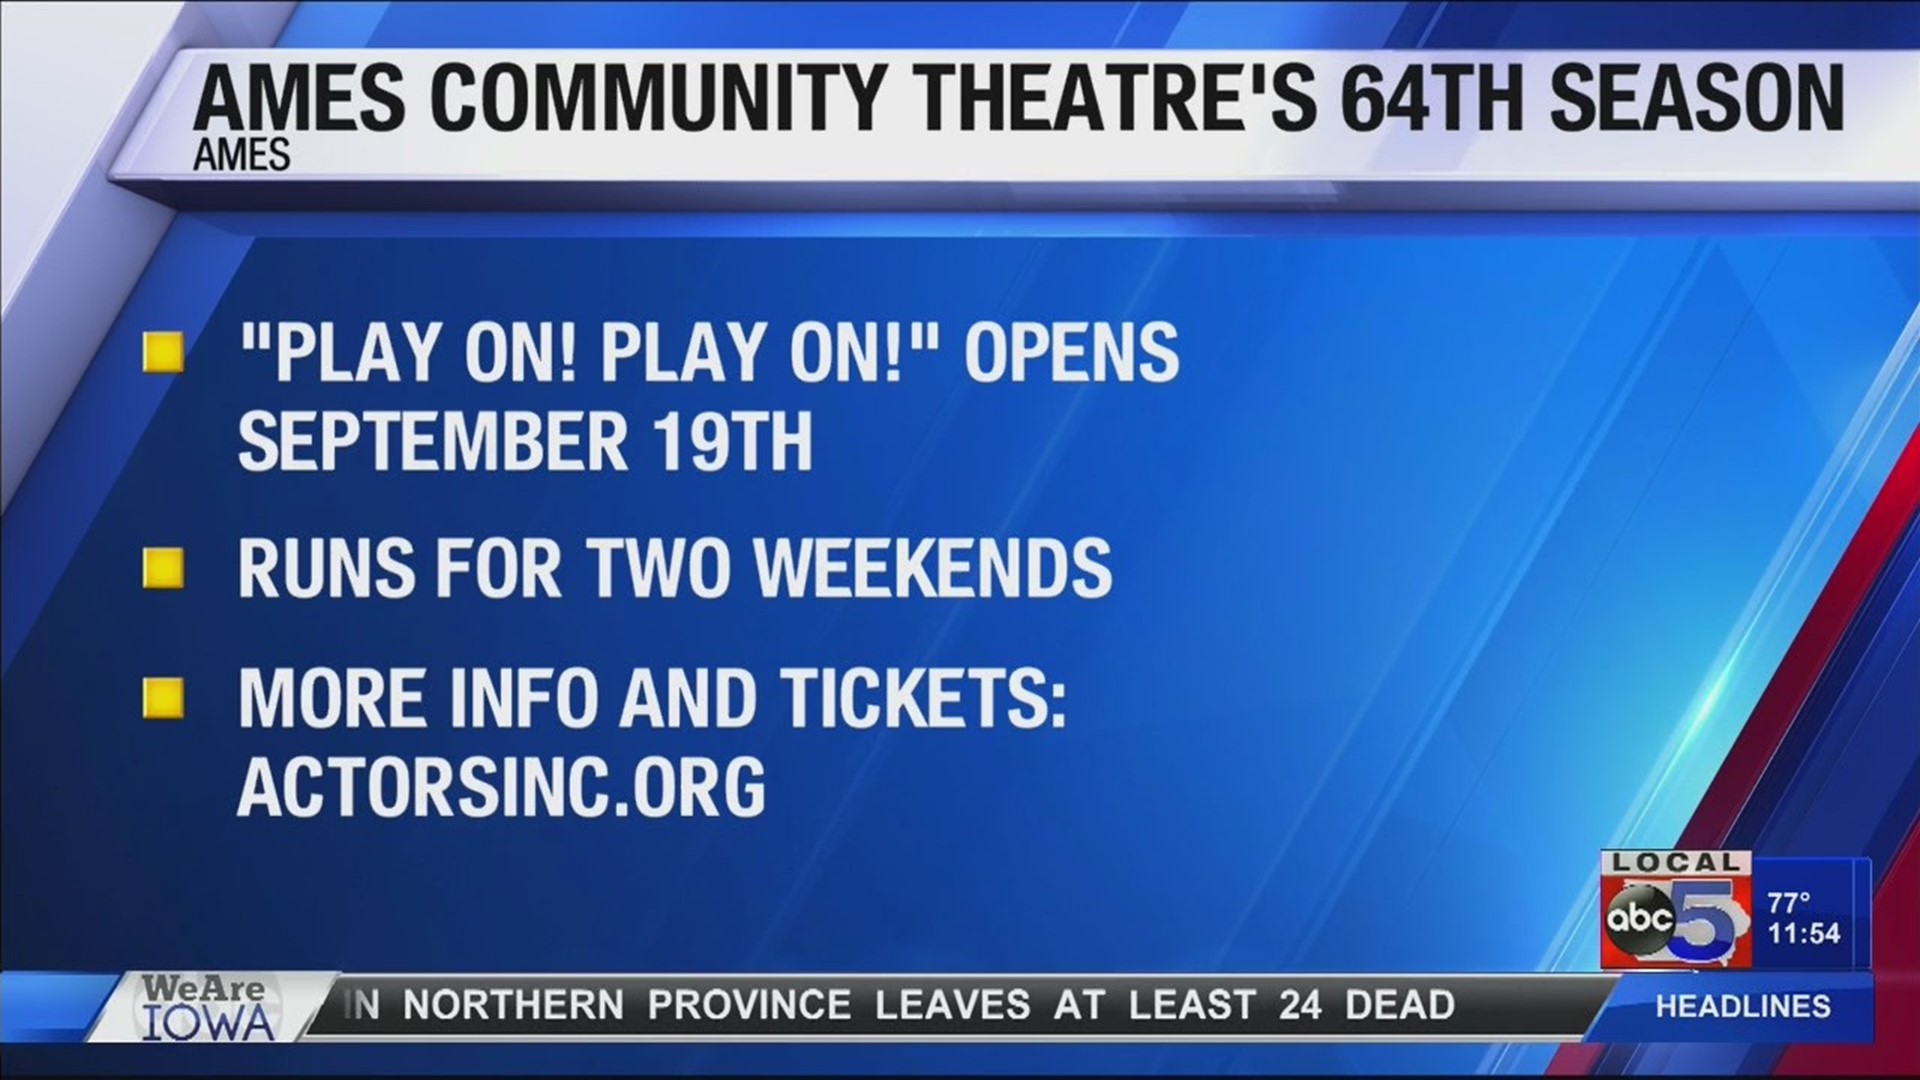 Ames Community Theatre opens with their 64th season.